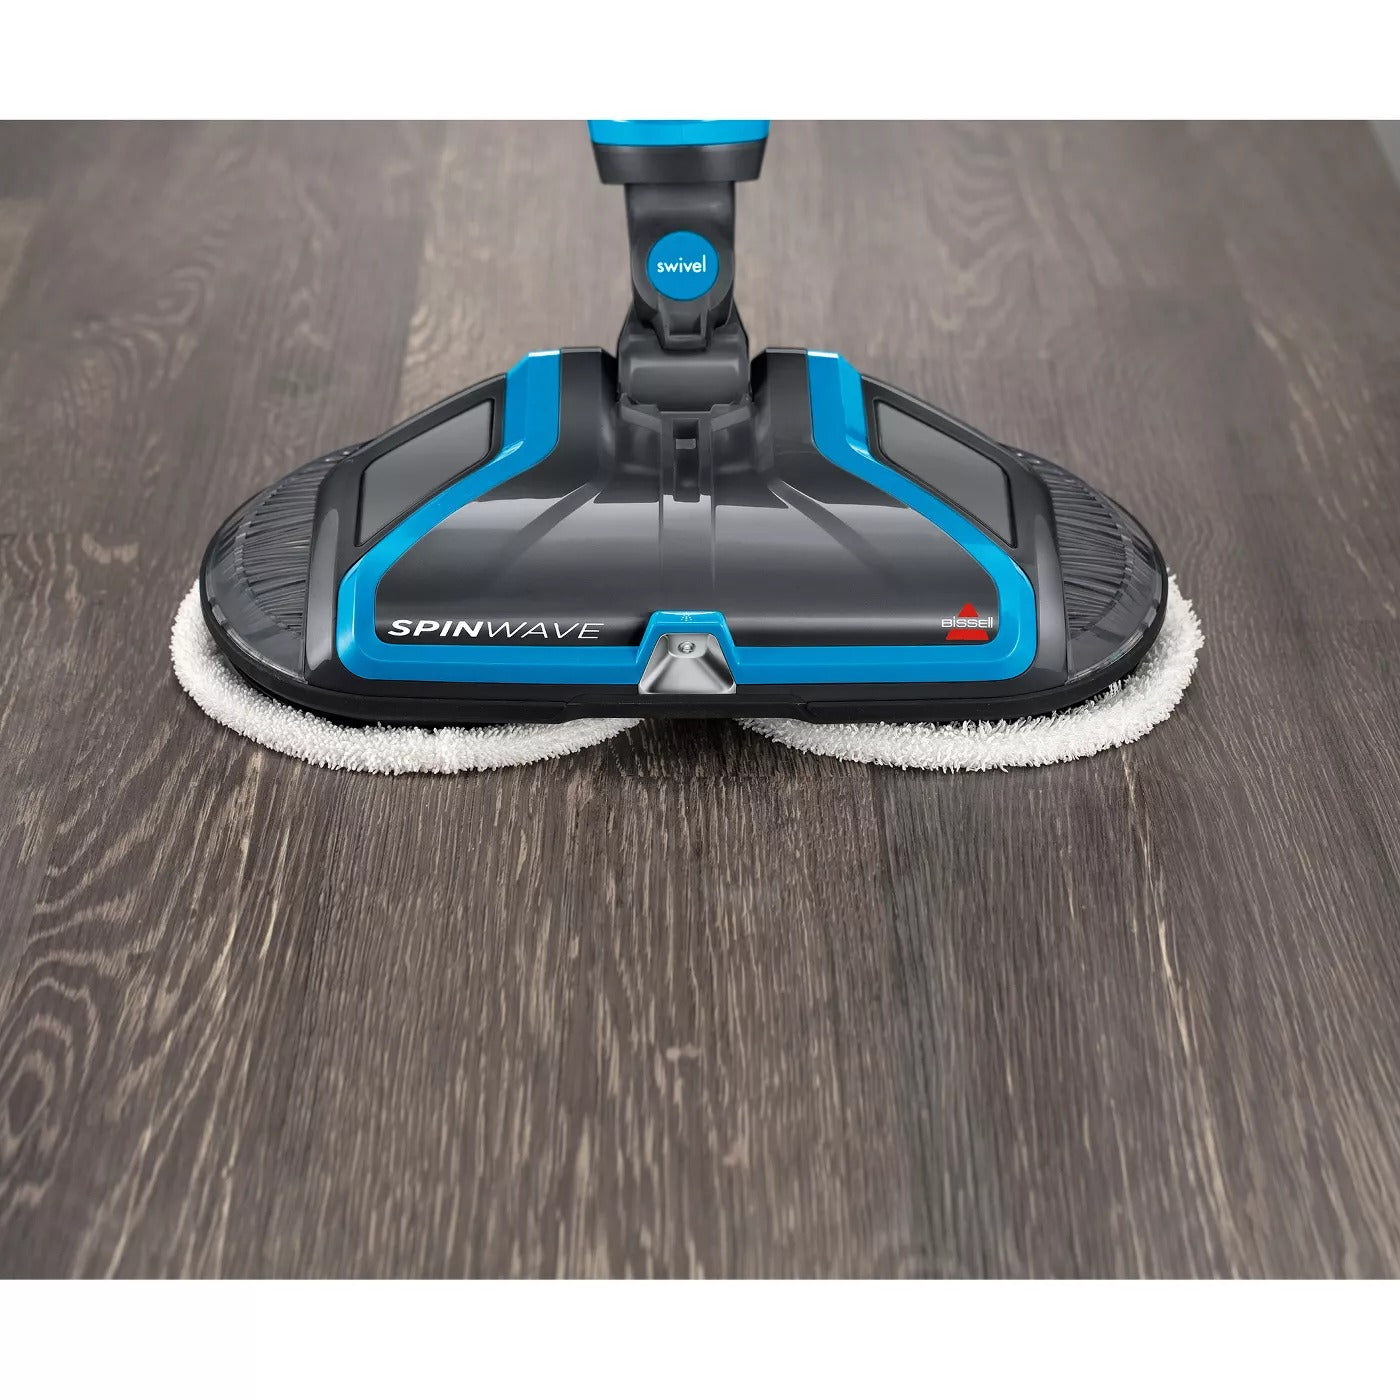 The Bissell SpinWave Floor Mop Is Under $100 at